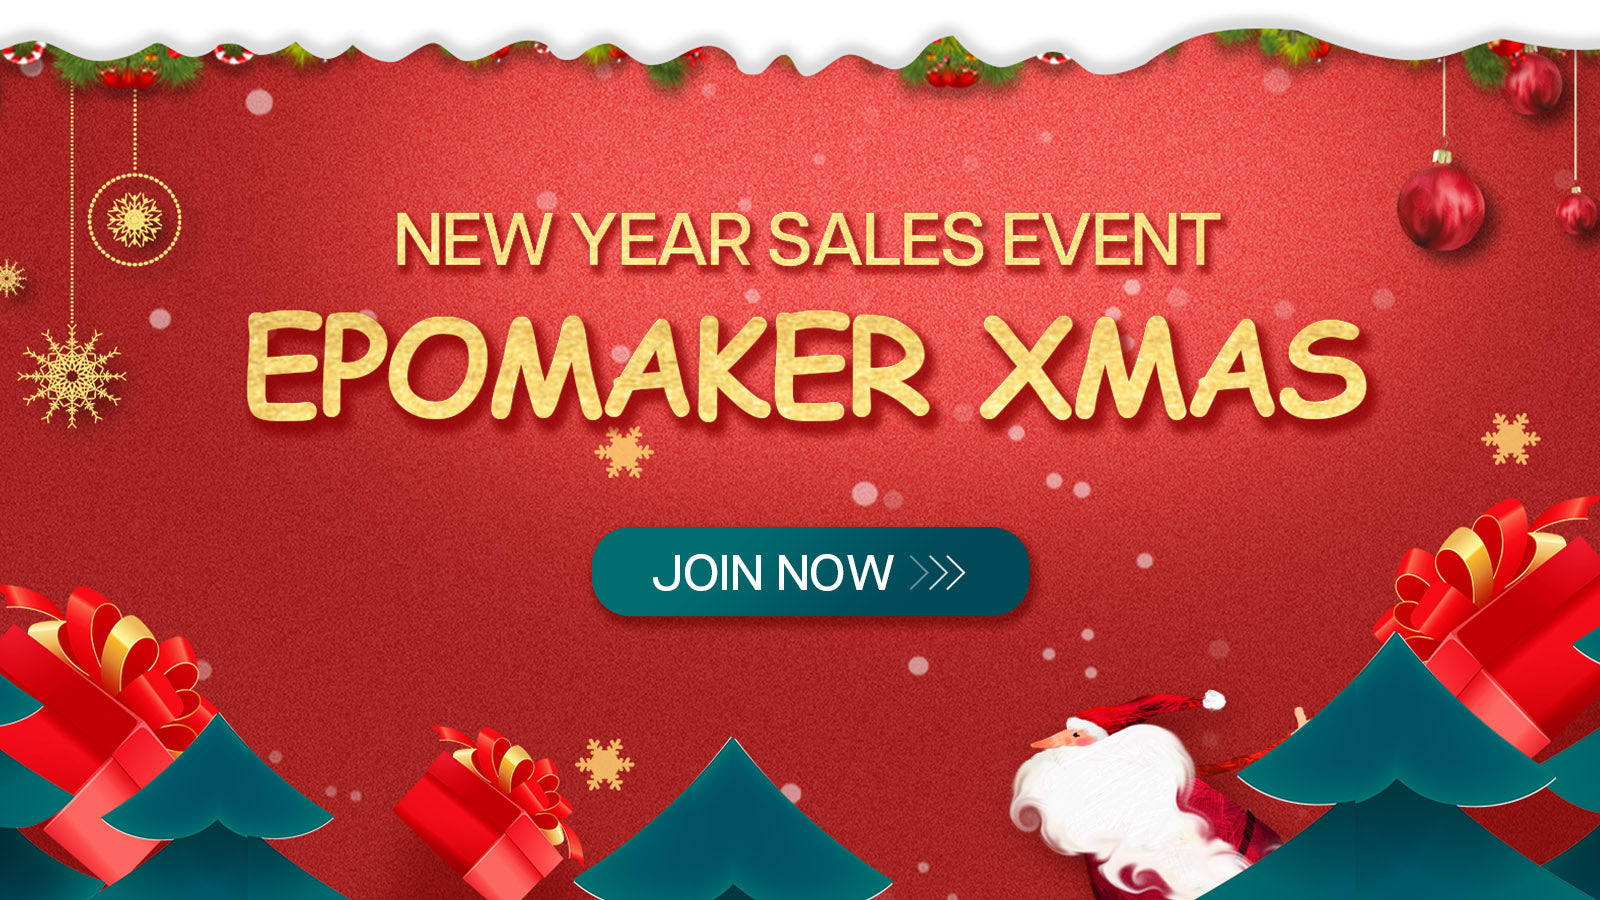 Epomaker Xmas-New-Year Sales Event